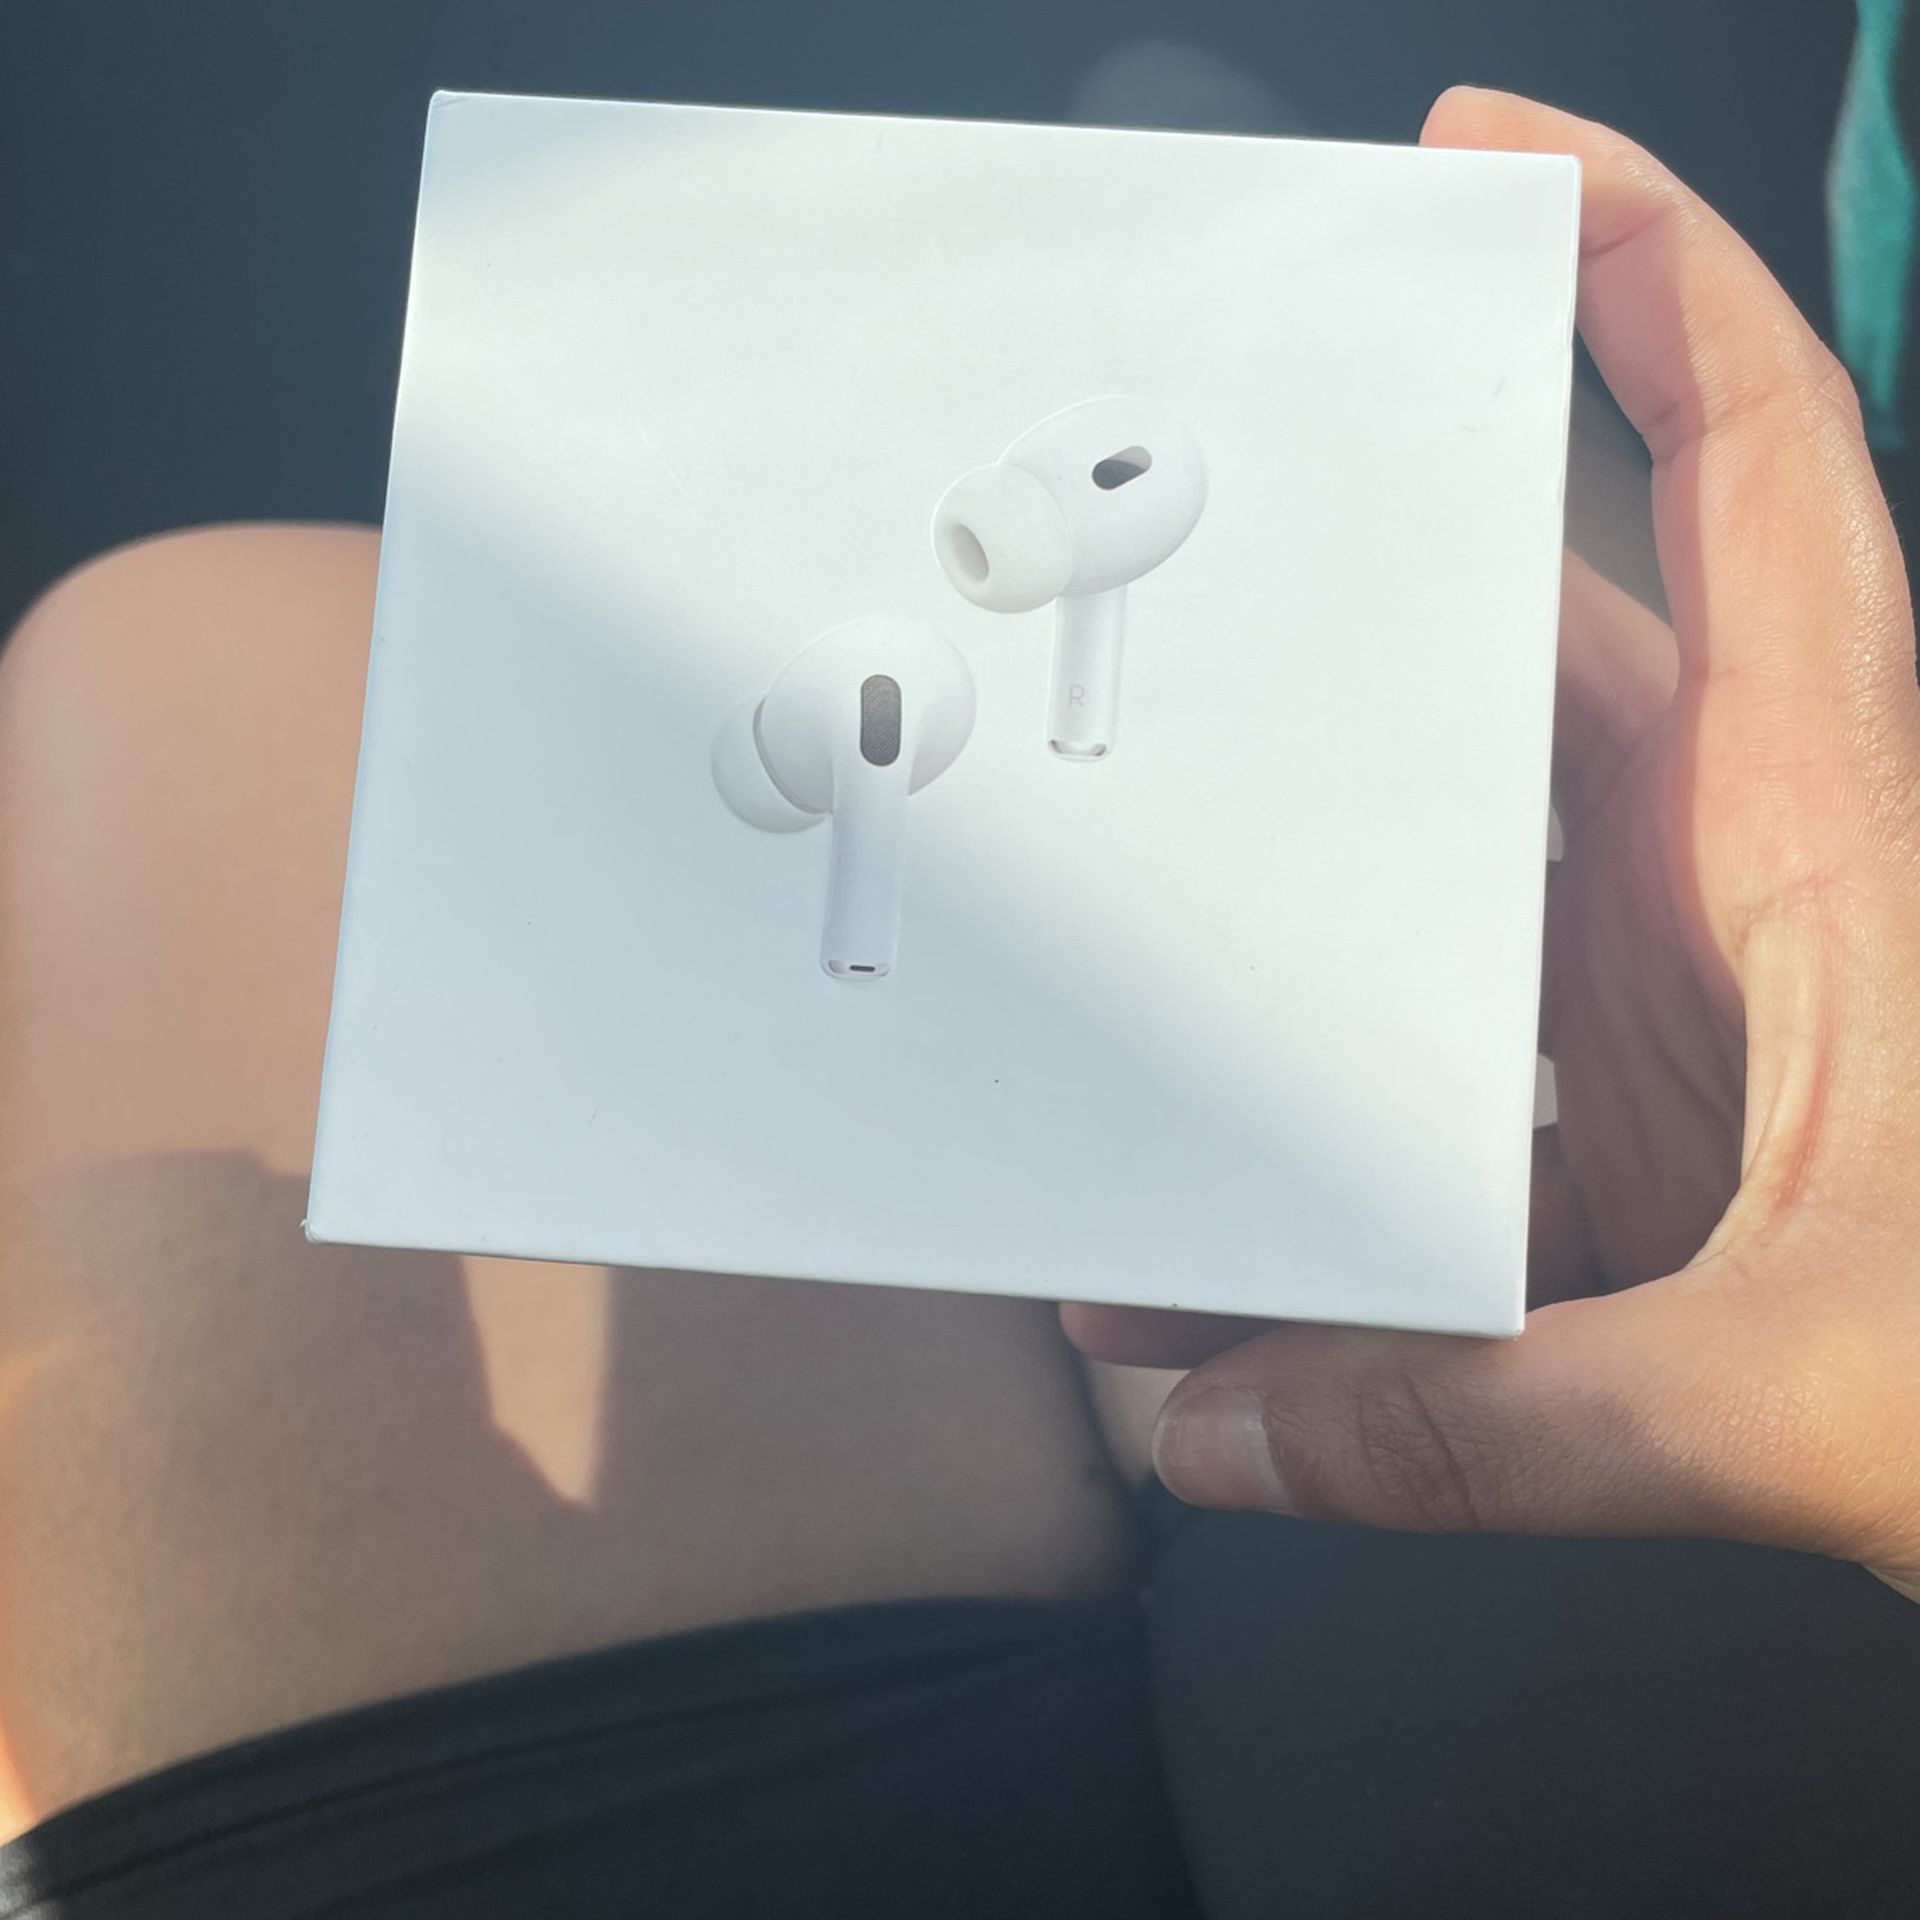 AIR PODS PRO 2 